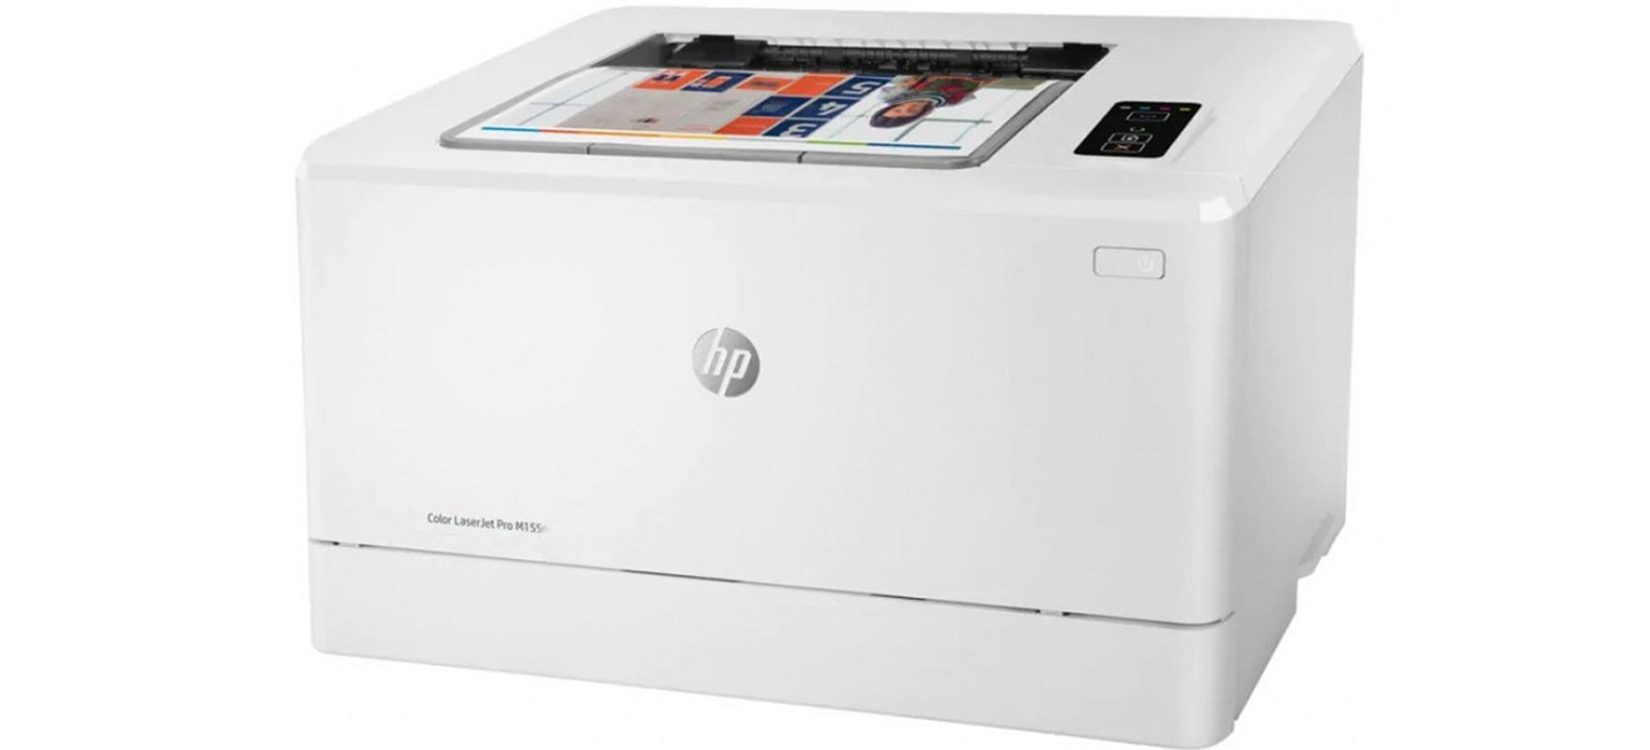 54966_may-in-mau-hp-color-laserjet-pro-m